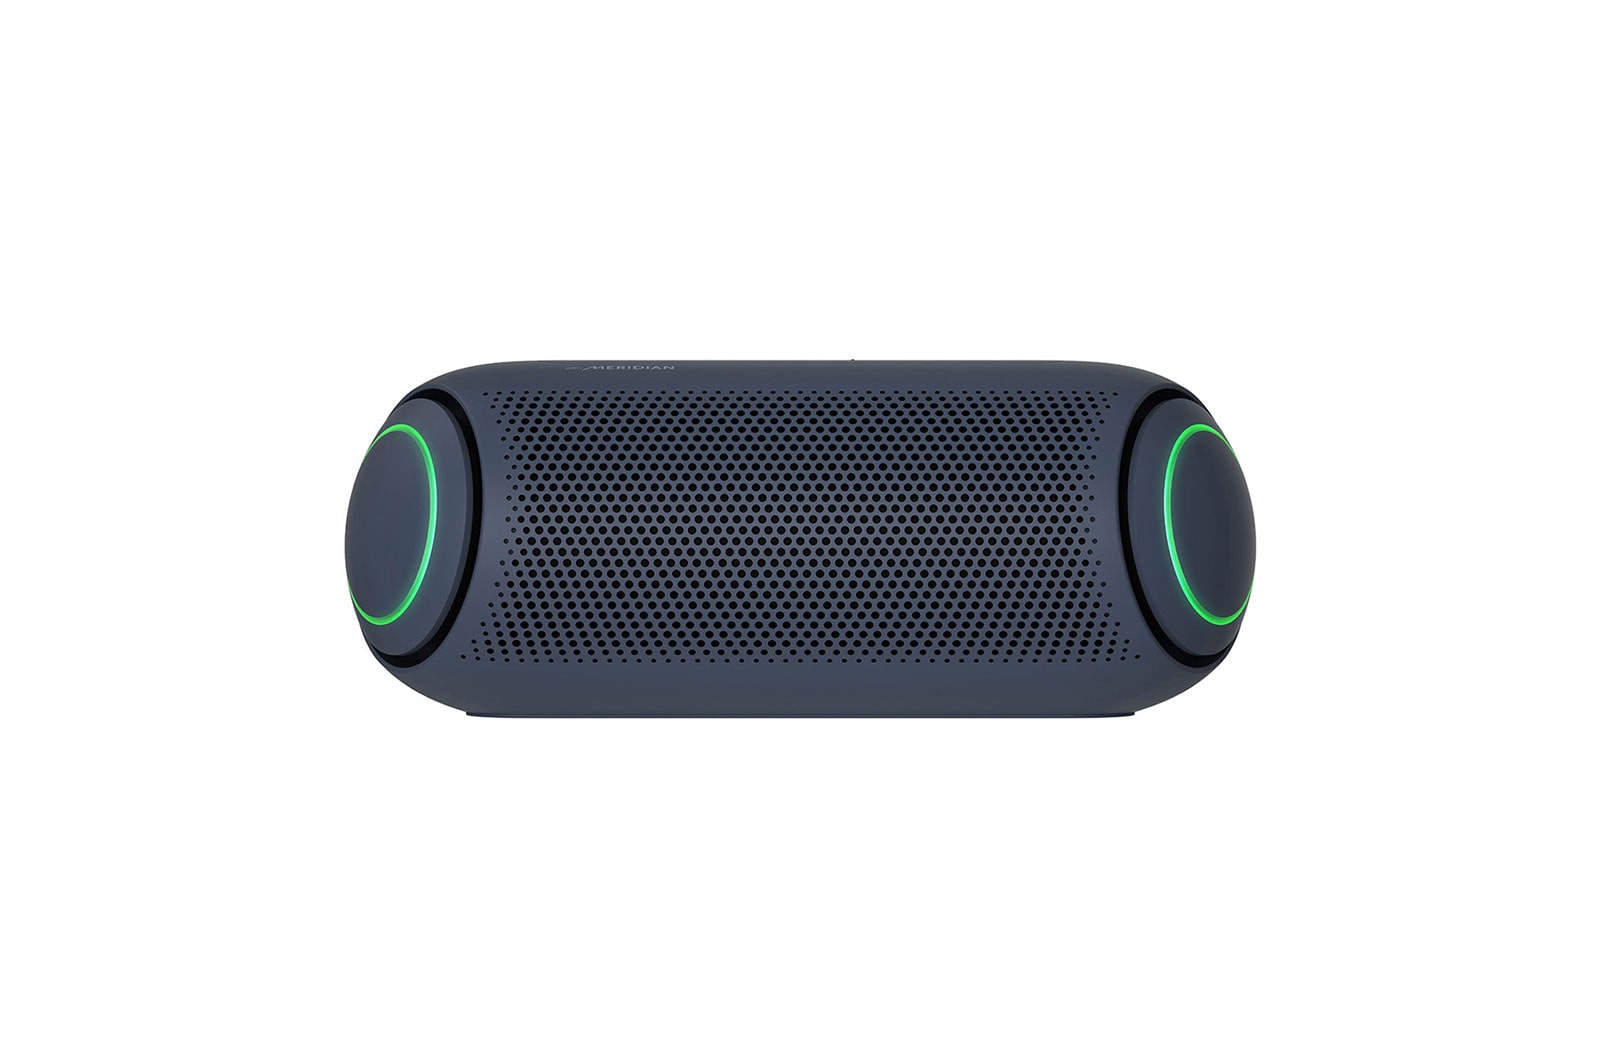 LG XBOOM Go PL5 Portable Wireless Bluetooth Speaker with Up to 18 Hours Long Battery Life, IPX5 Water-Resistant Party Bluetooth Speaker, Black